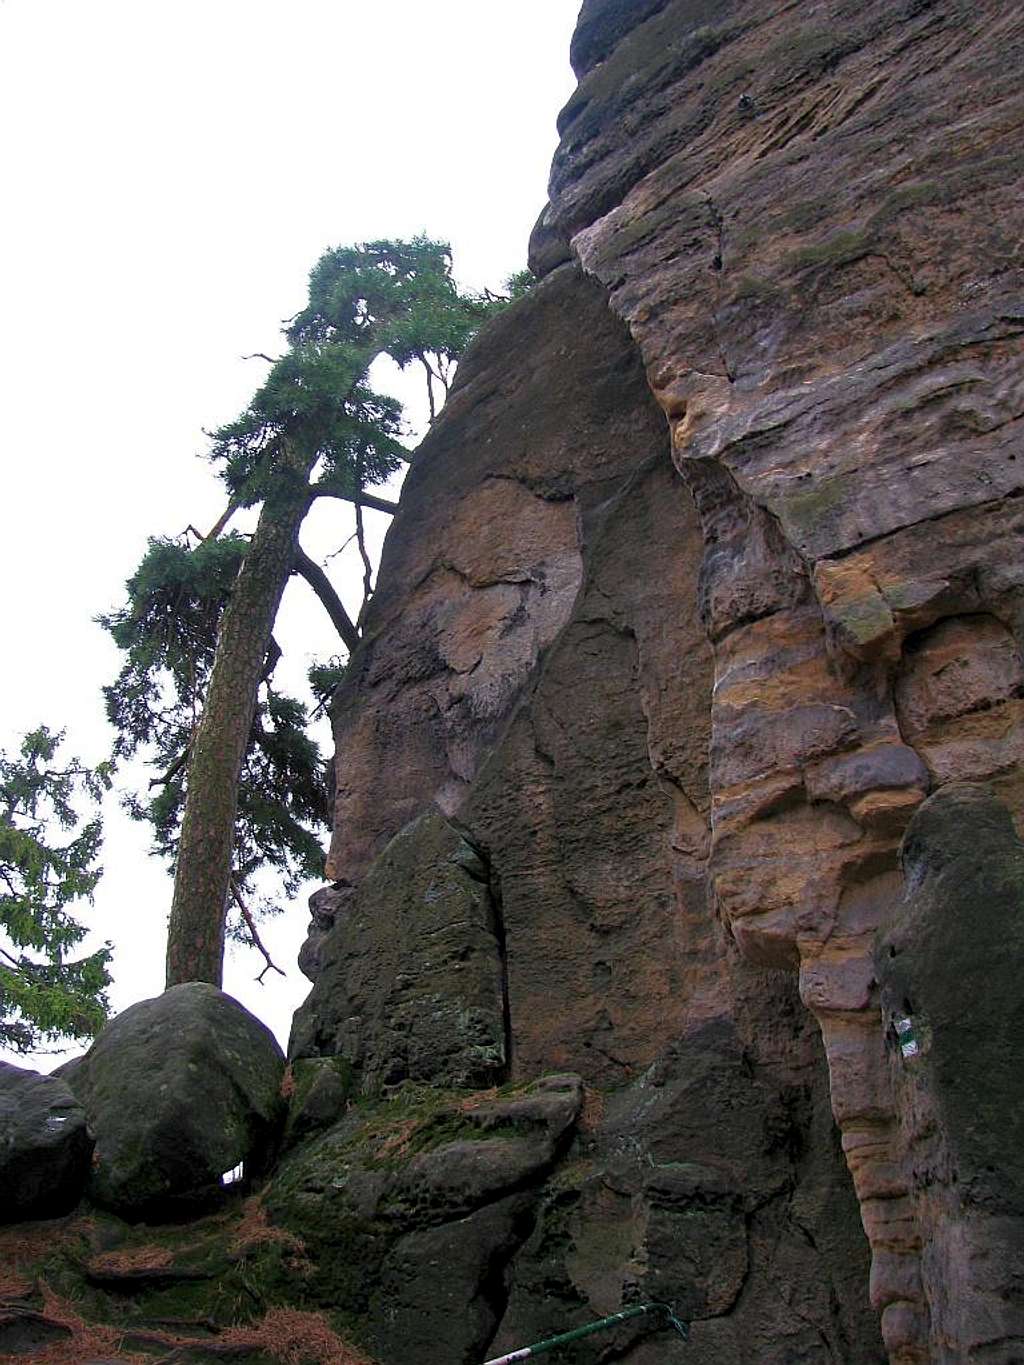 Cooexistance of trees and rocks